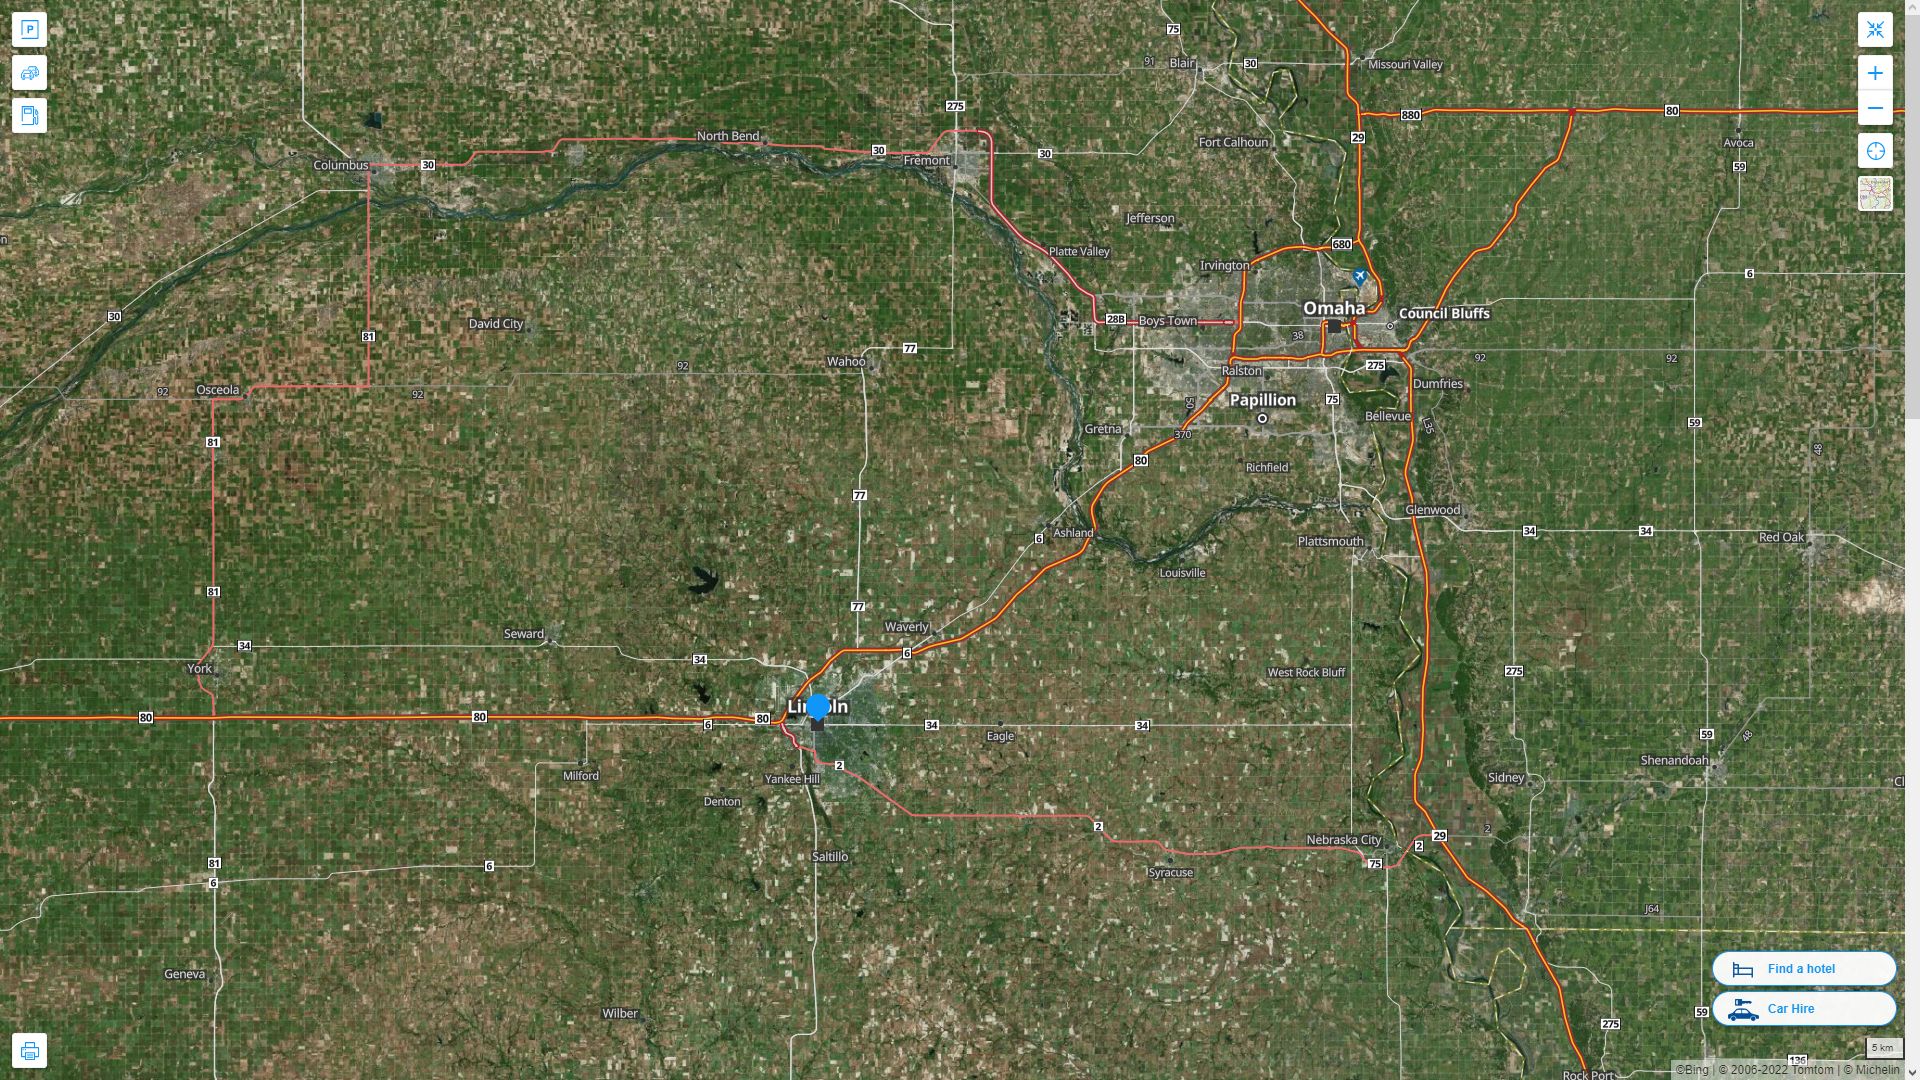 Lincoln Nebraska Highway and Road Map with Satellite View